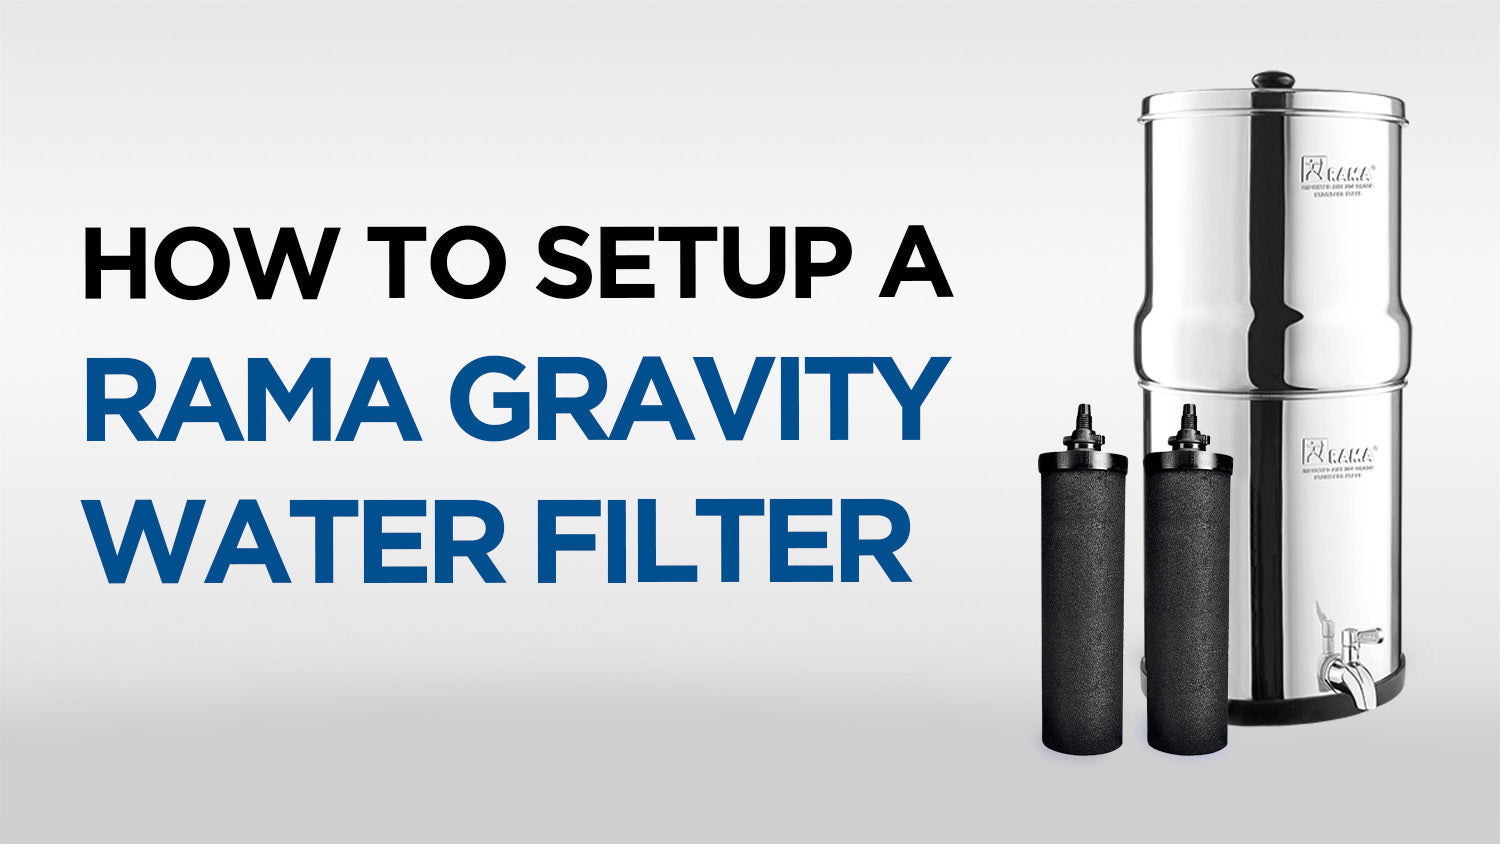 How to Setup a RAMA GRAVITY Water Filter